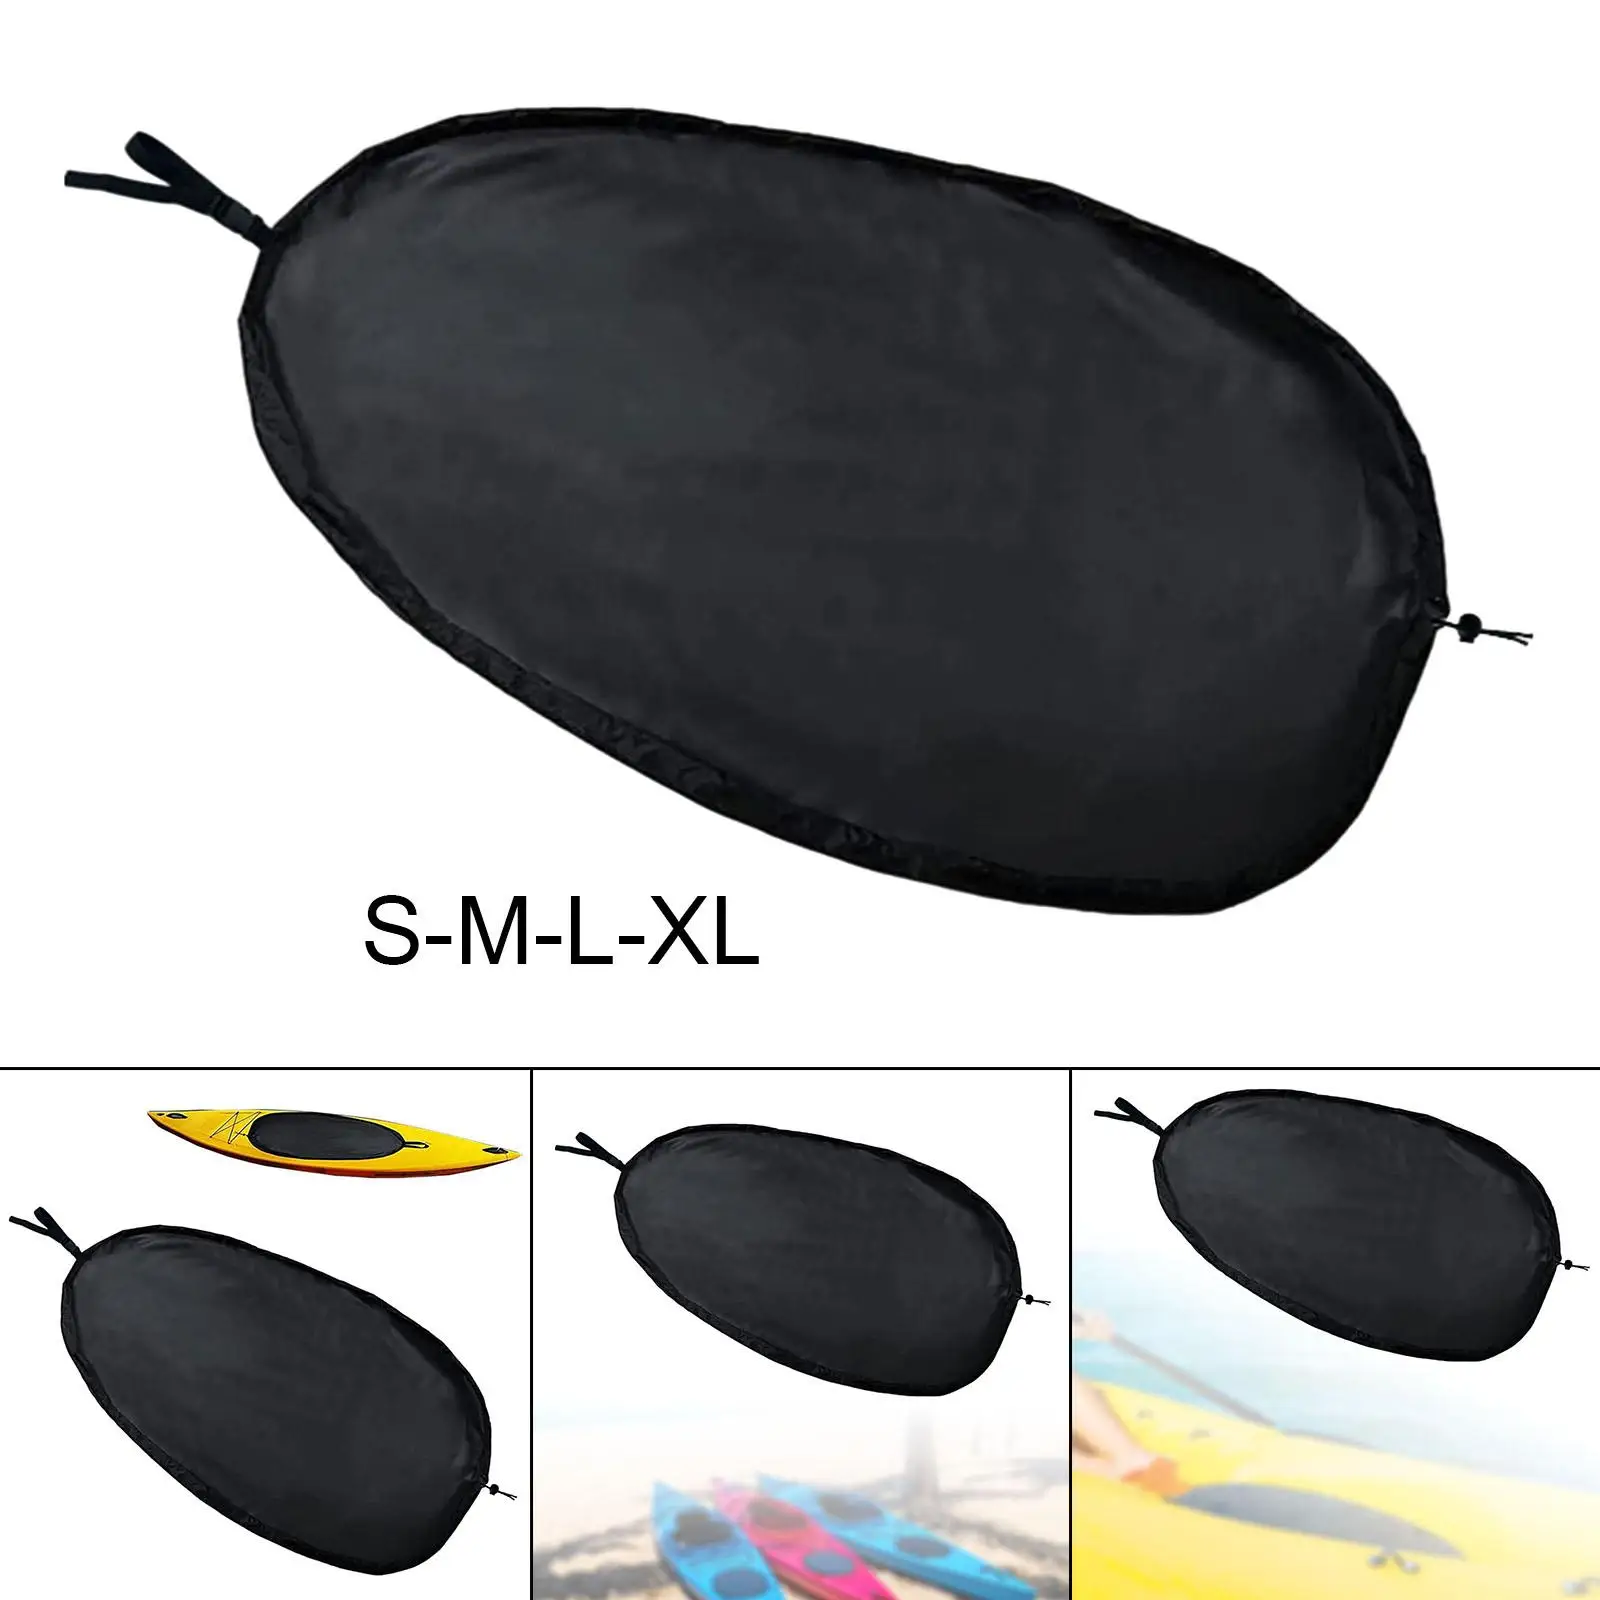 Portable Kayak Cockpit Cover Waterproof Breathable Adjustable Sun Protection Durable Dust Proof Cover for Outdoor Boat